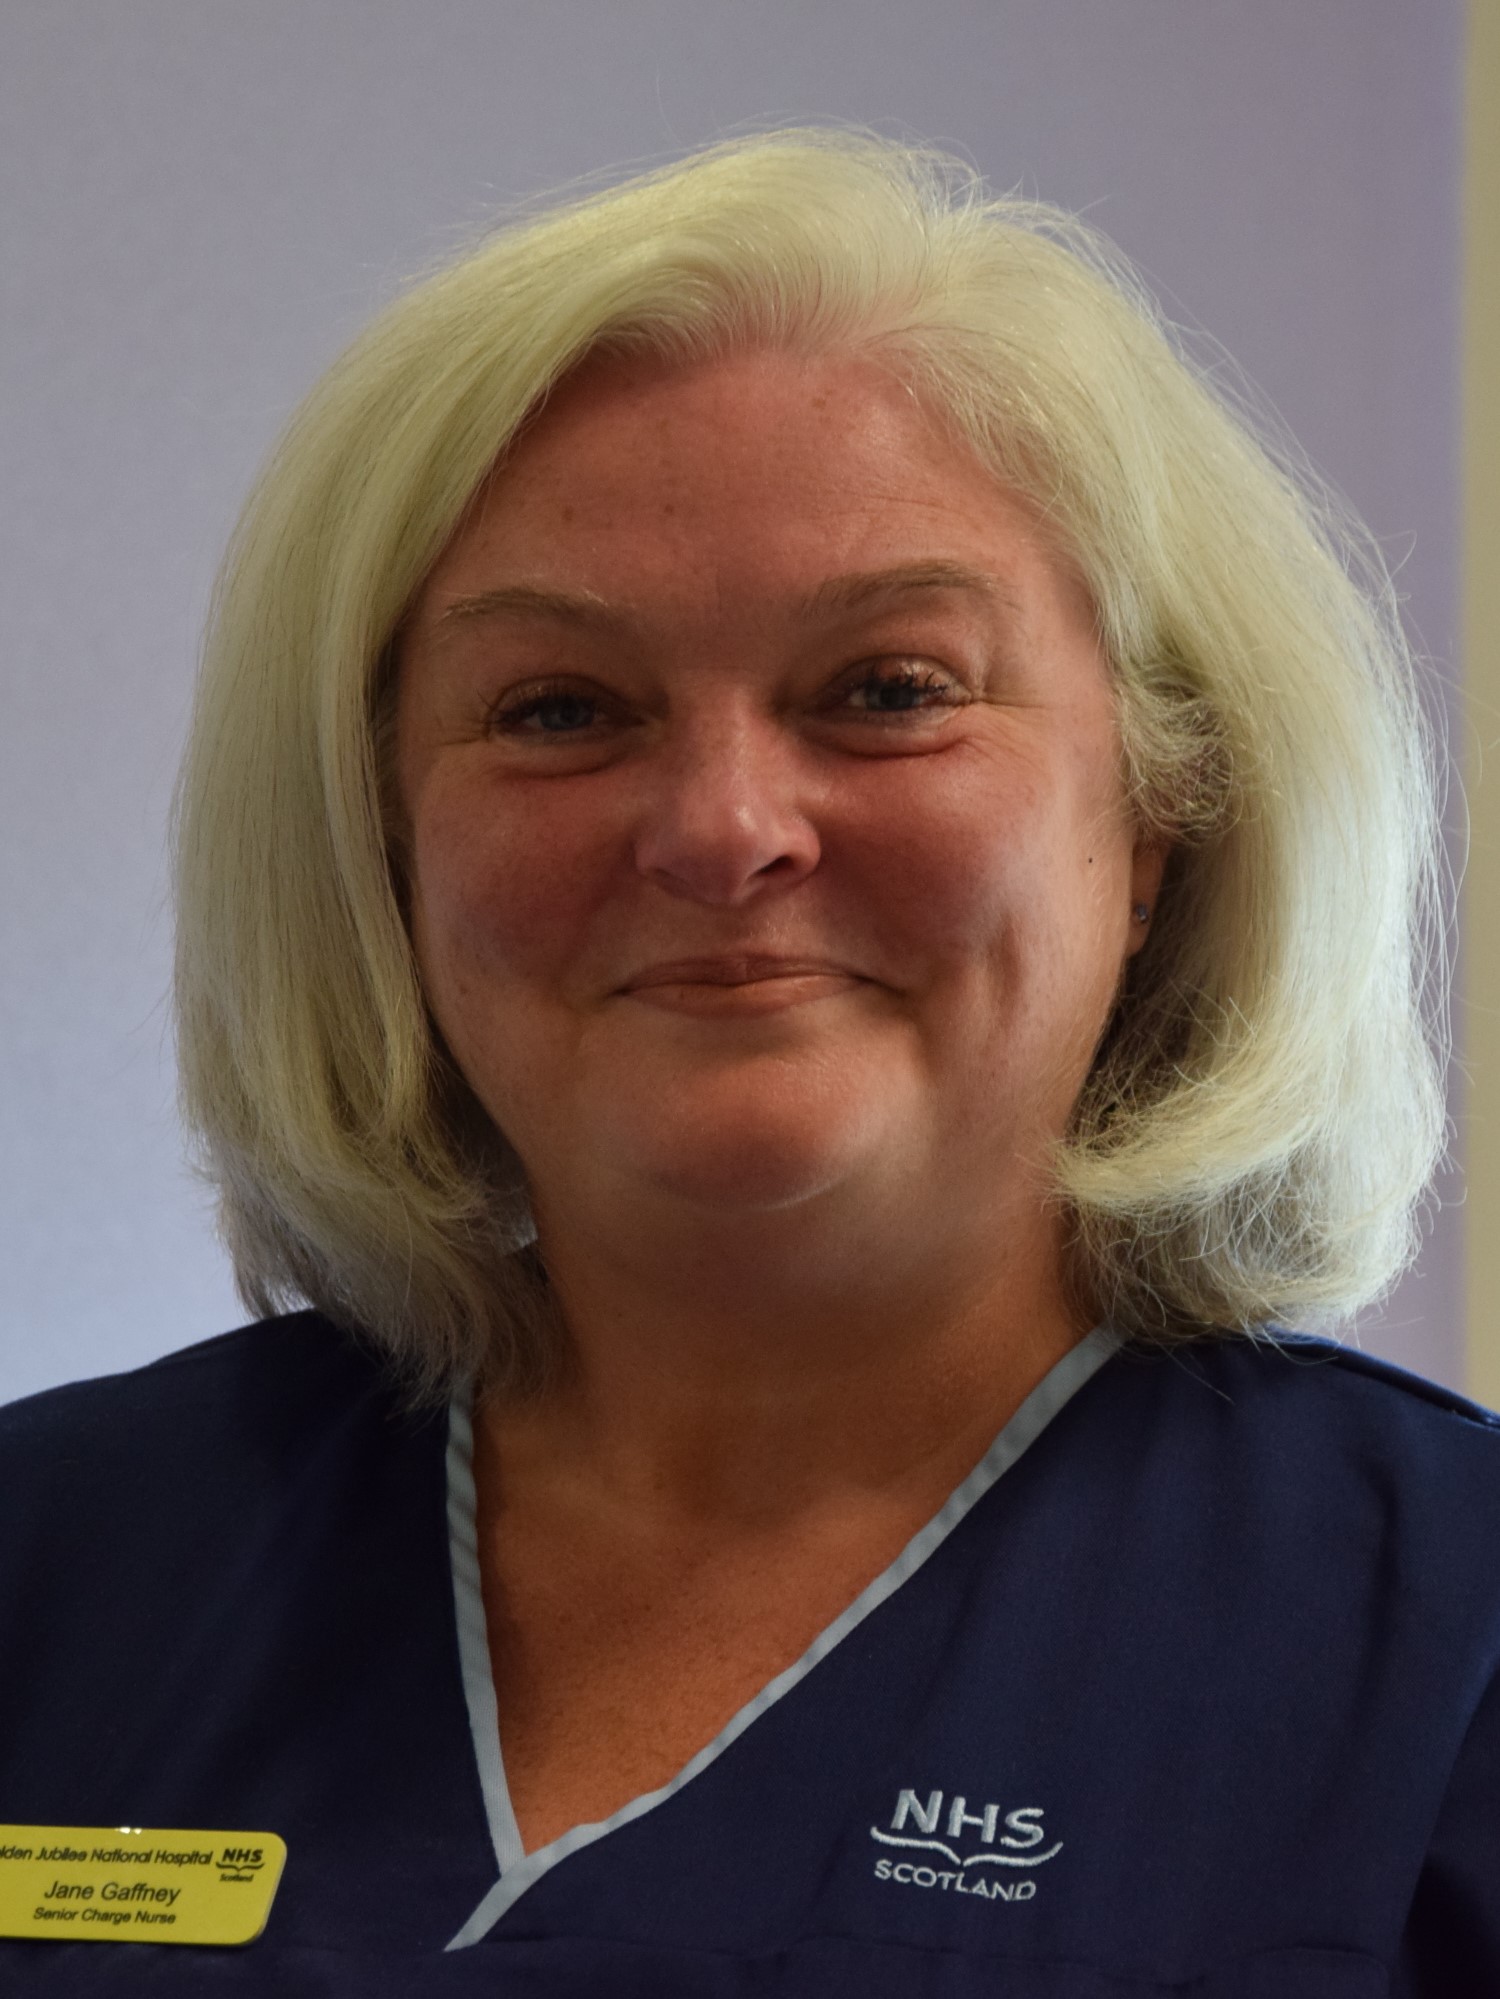 A person with short blond hair, wearing blue NHS scrubs.